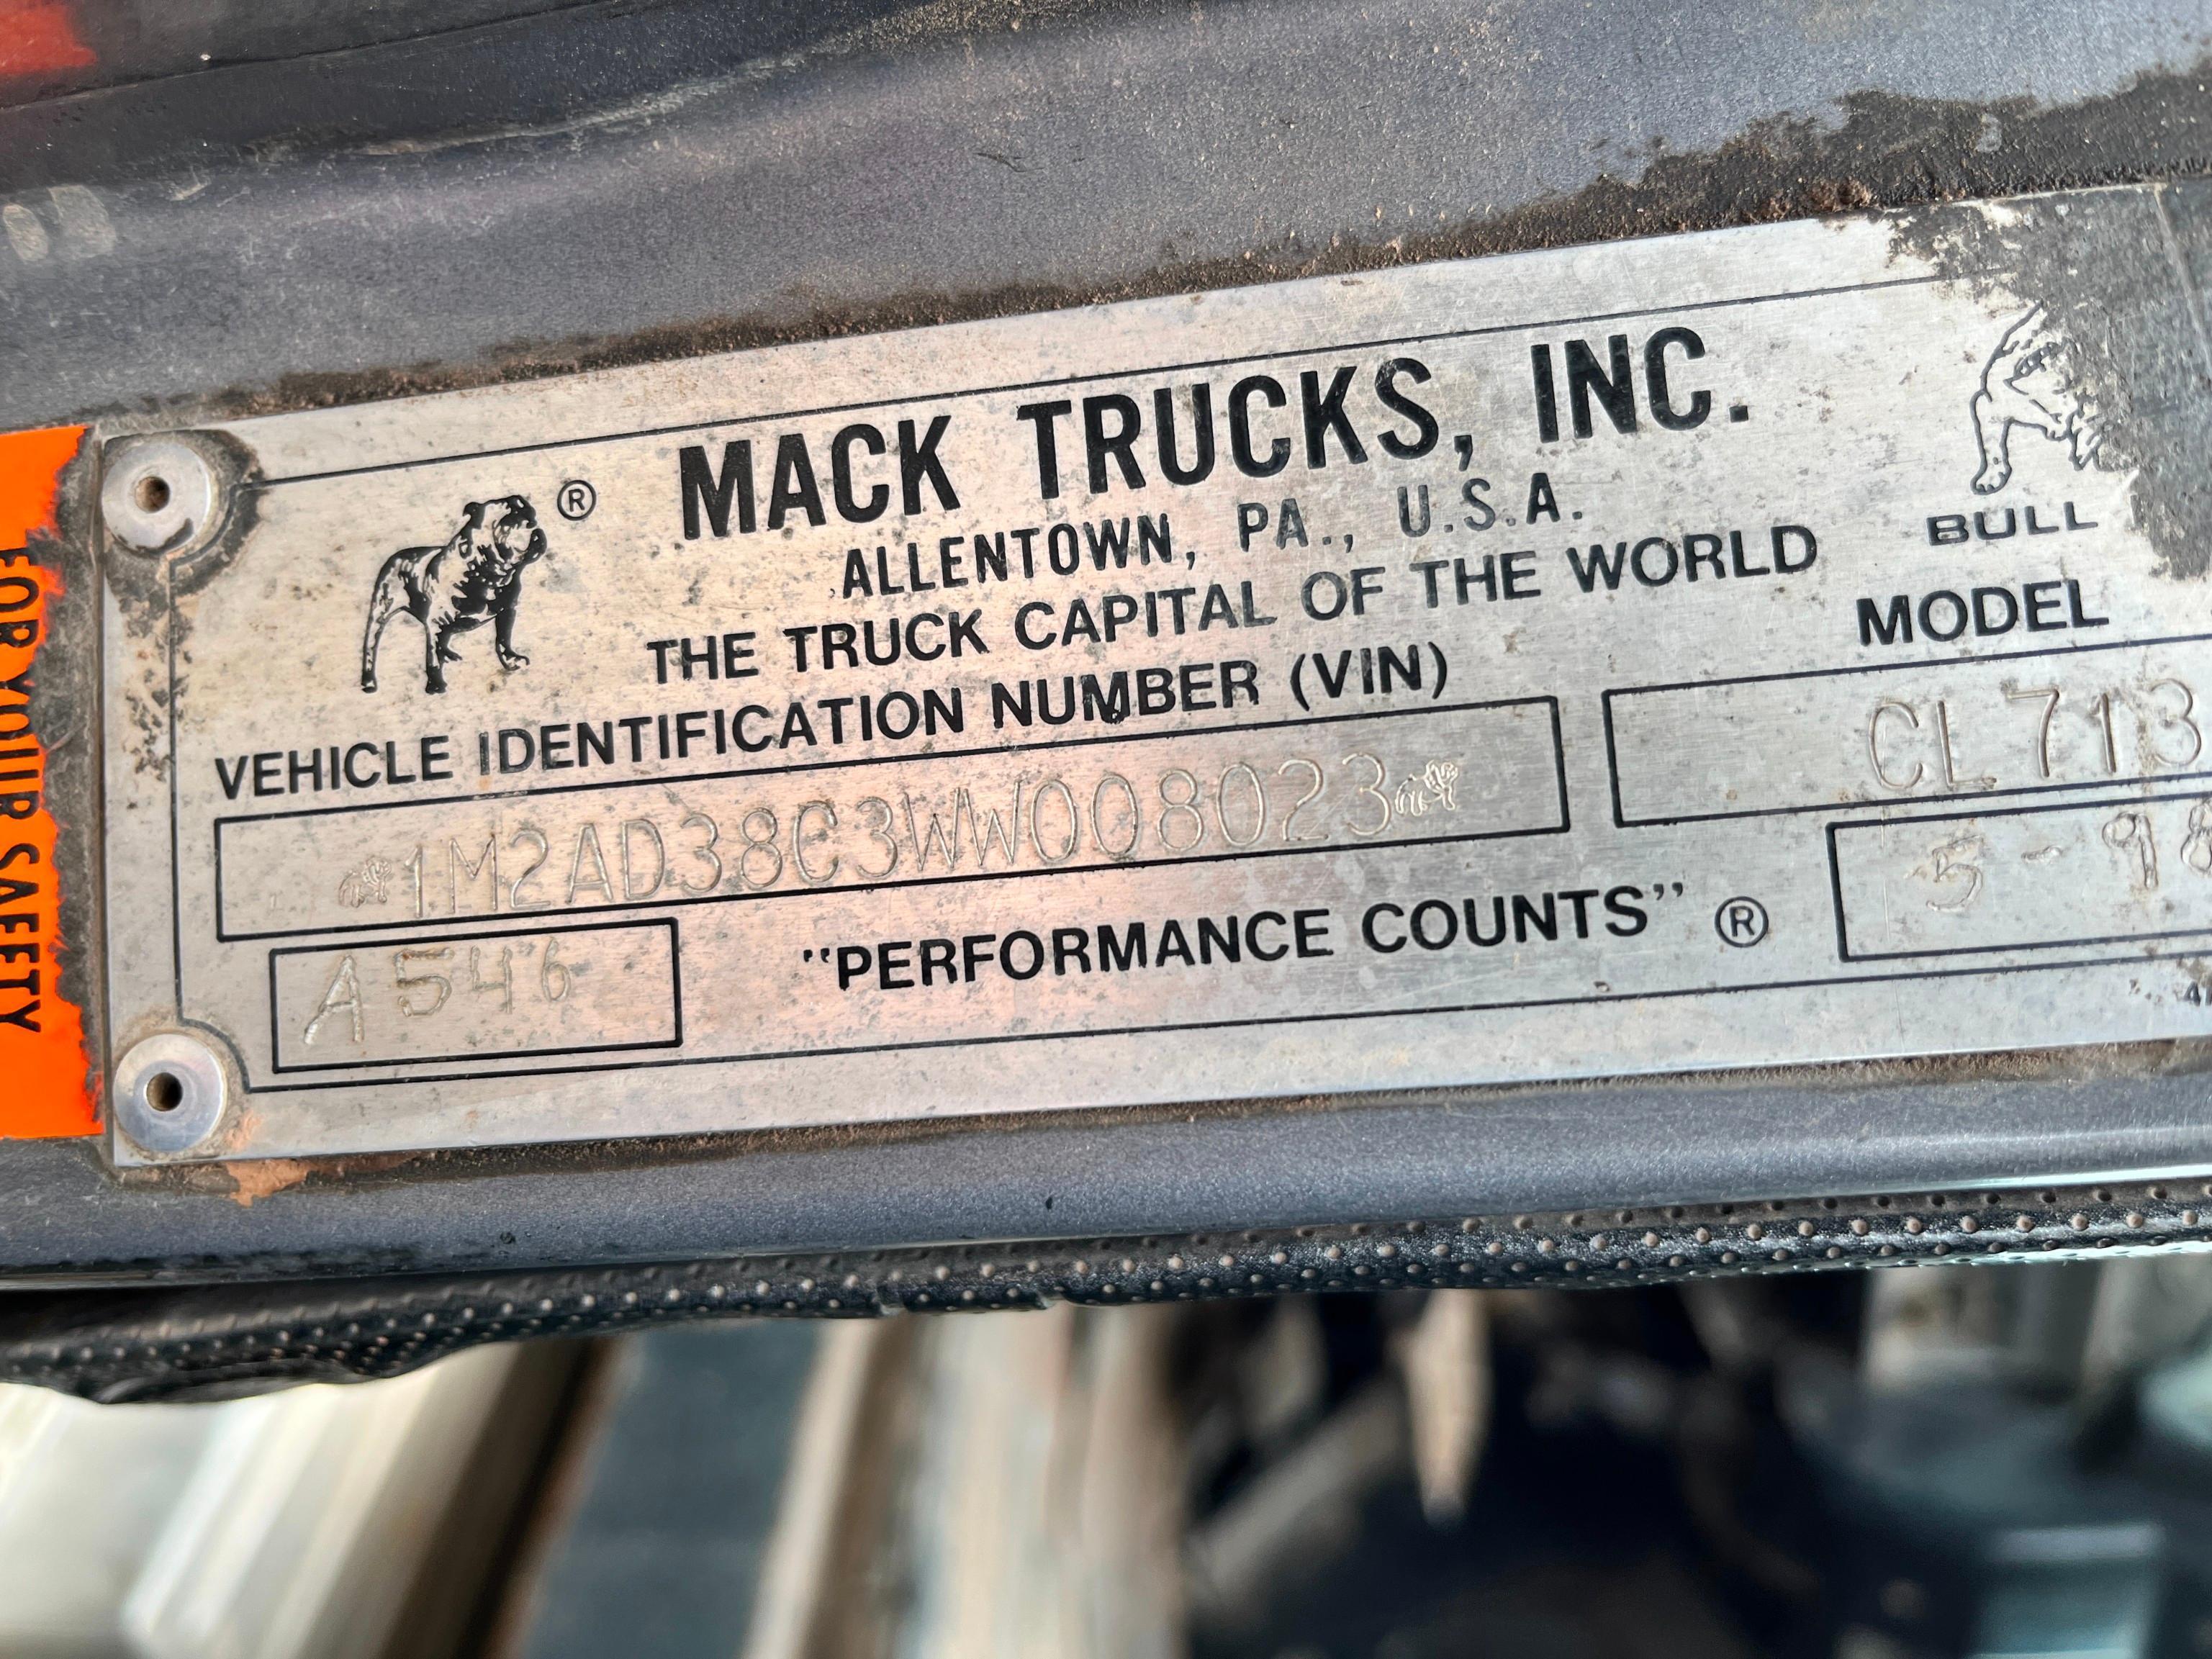 1998 MACK CL713 DUMP TRUCK VN:1M2AD38C3WW008023 powered by Mack E7-460 diesel engine, equipped with